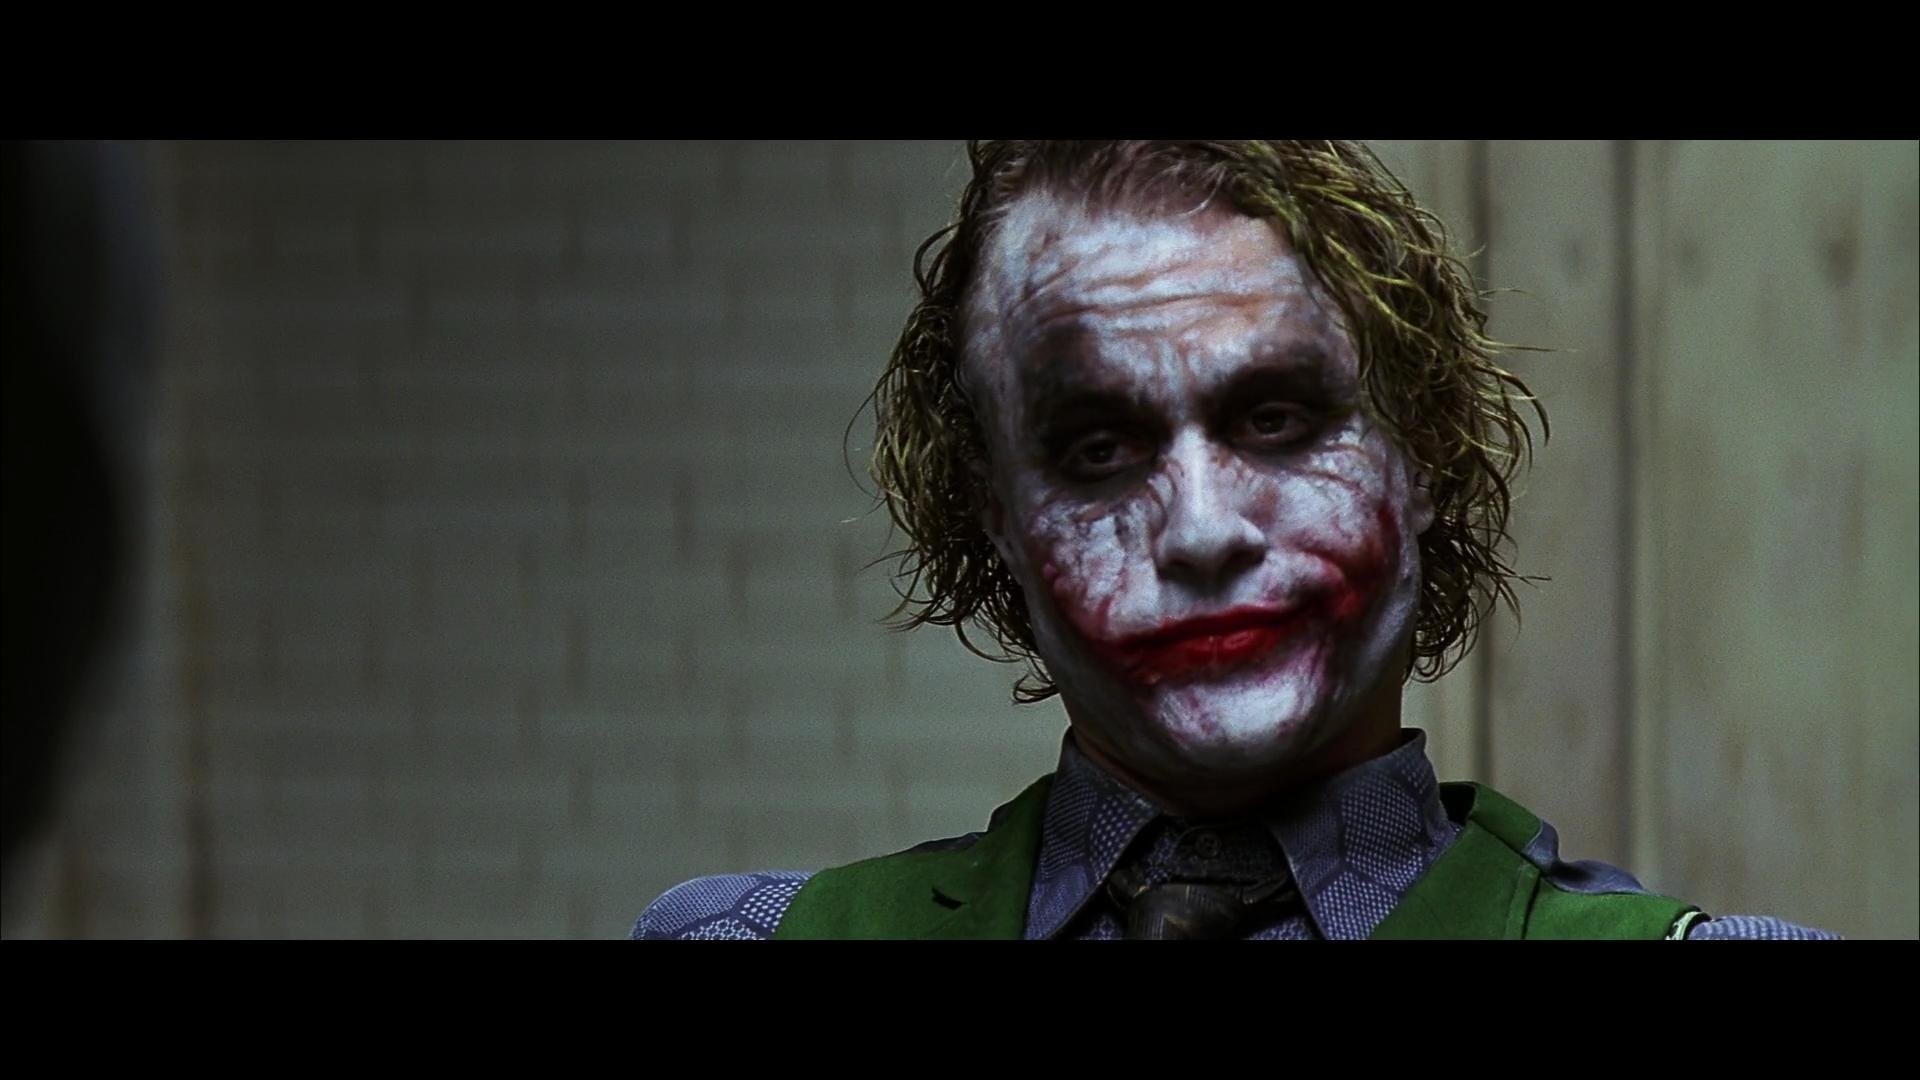 1920x1080 undefined The Joker Dark Knight Wallpapers (53 Wallpapers) | Adorable  Wallpapers